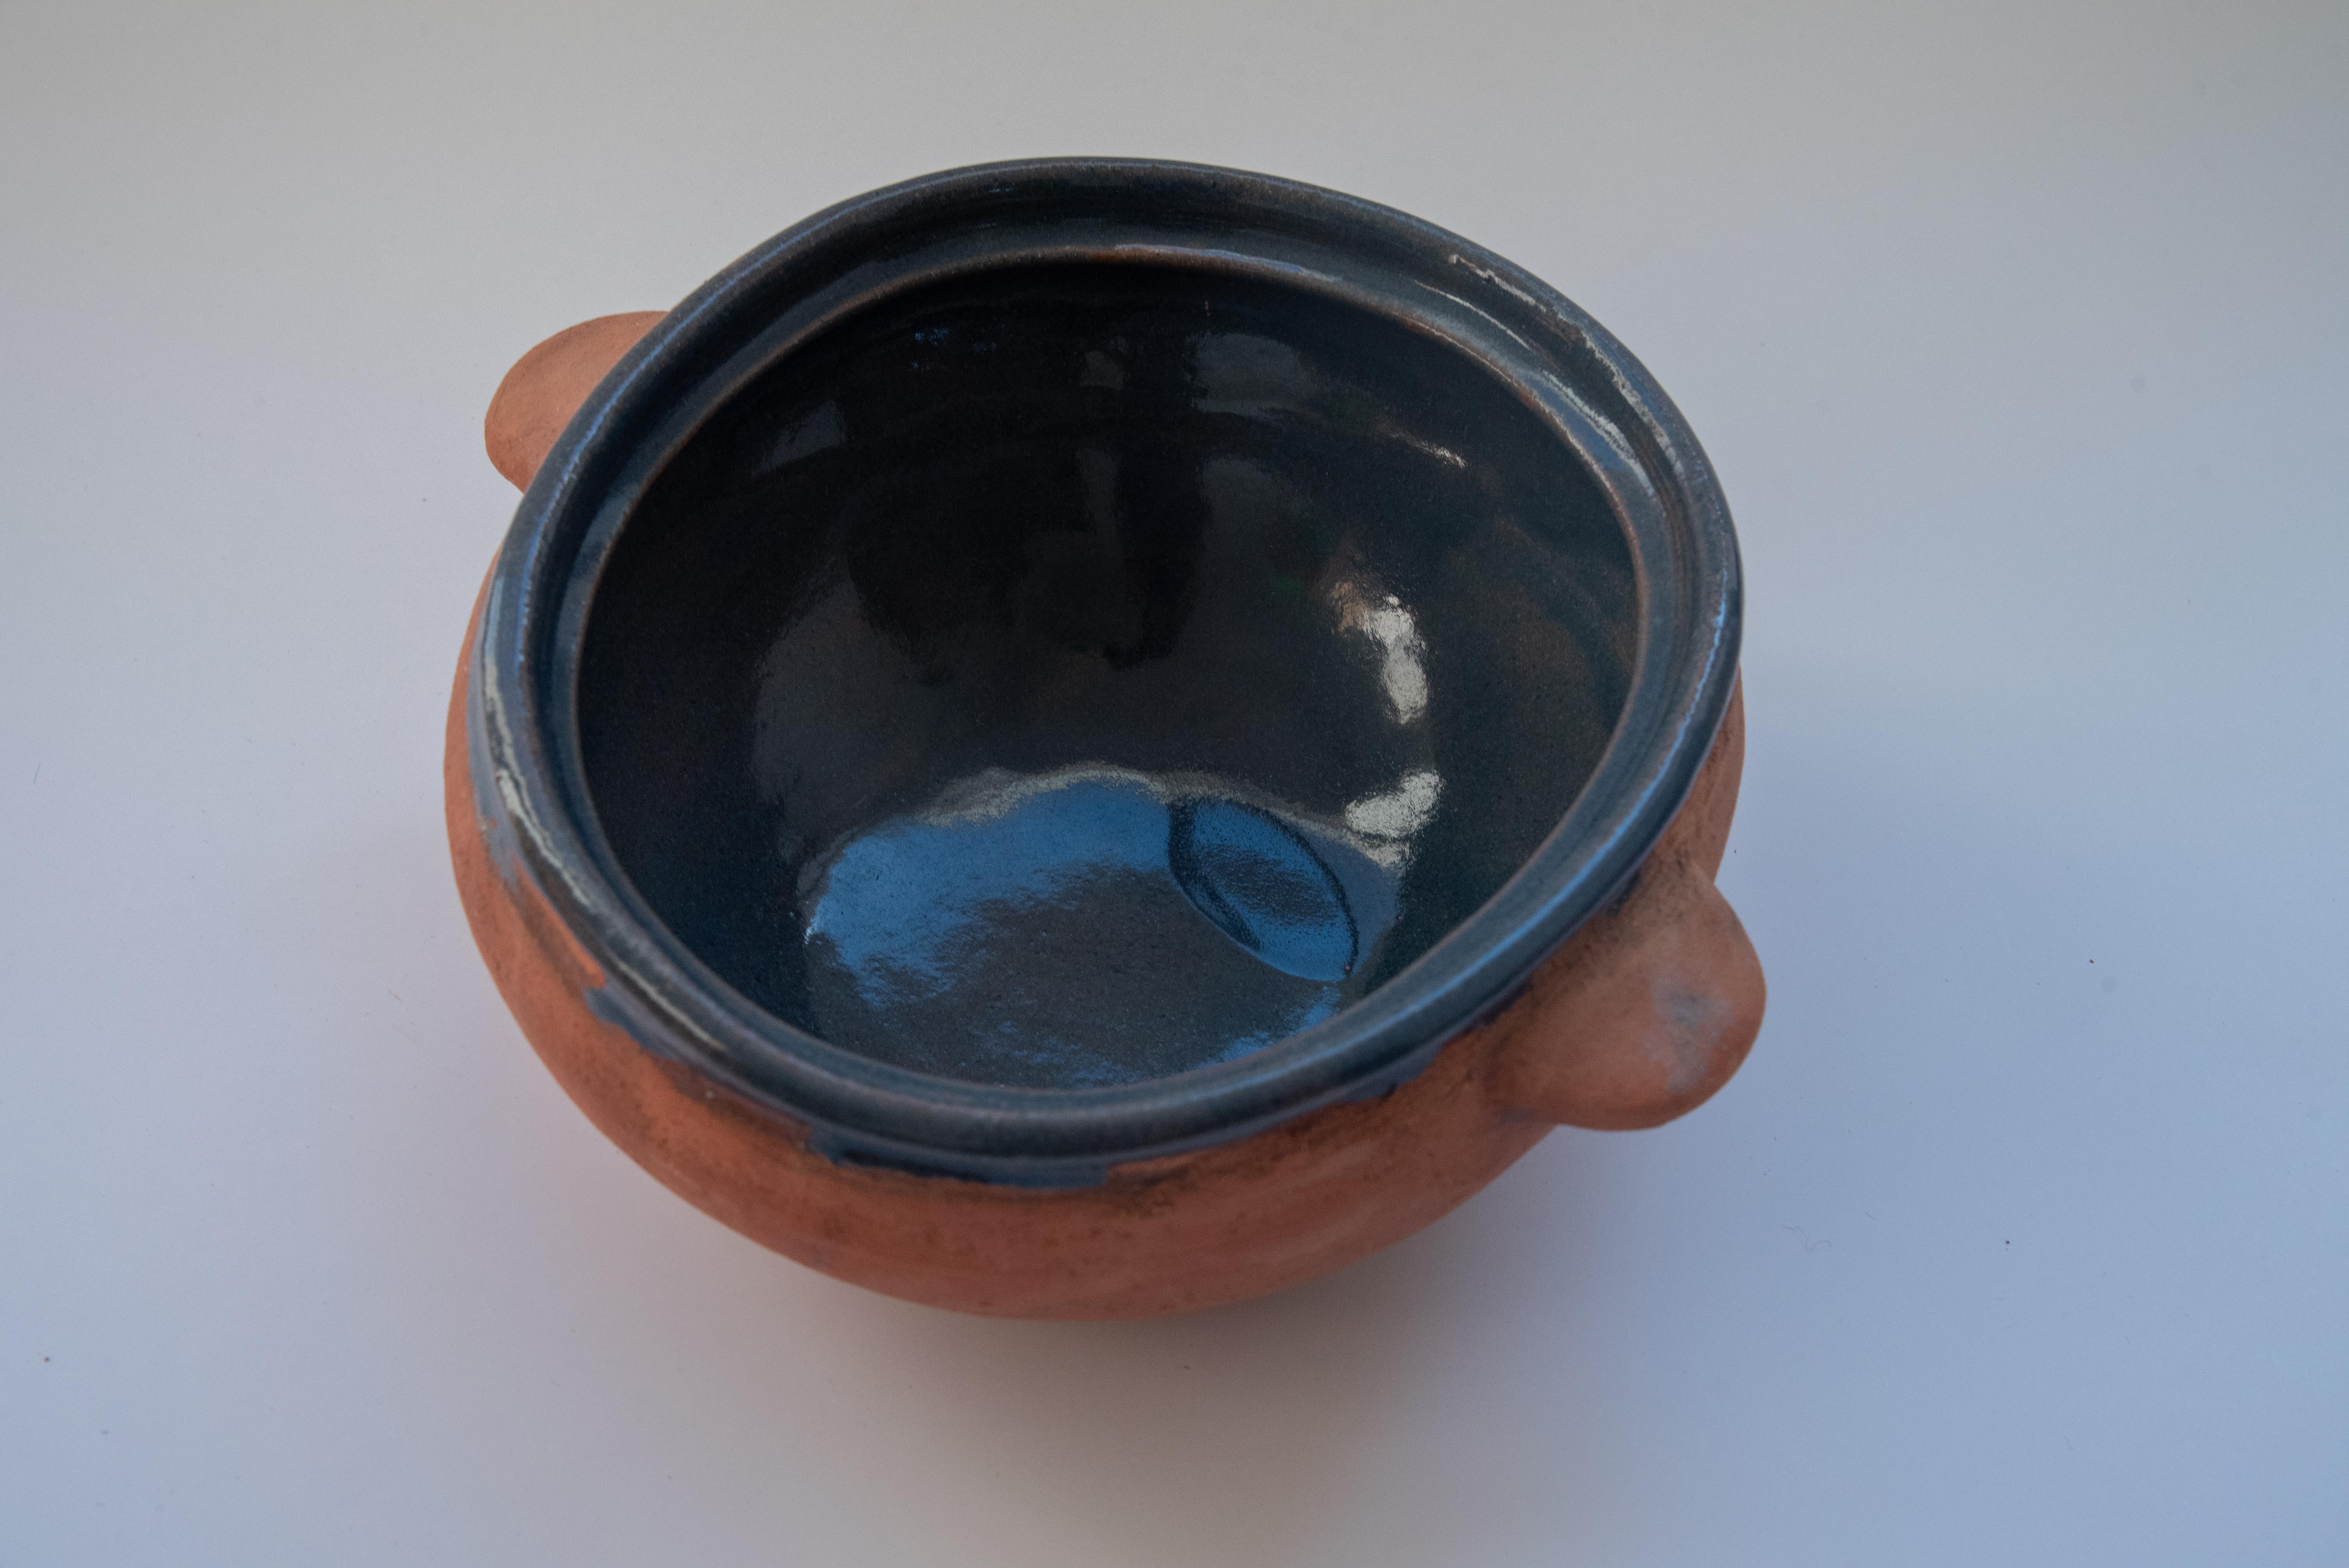 This beautiful utilitarian ceramic fruit bowl is covered on the surface with lead free blue pigment. Made in Oaxaca, Mexico, by artist Rolando Regino, Porras, son of famous folk artist Dolores Porras. This traditional design is perfect for rustic